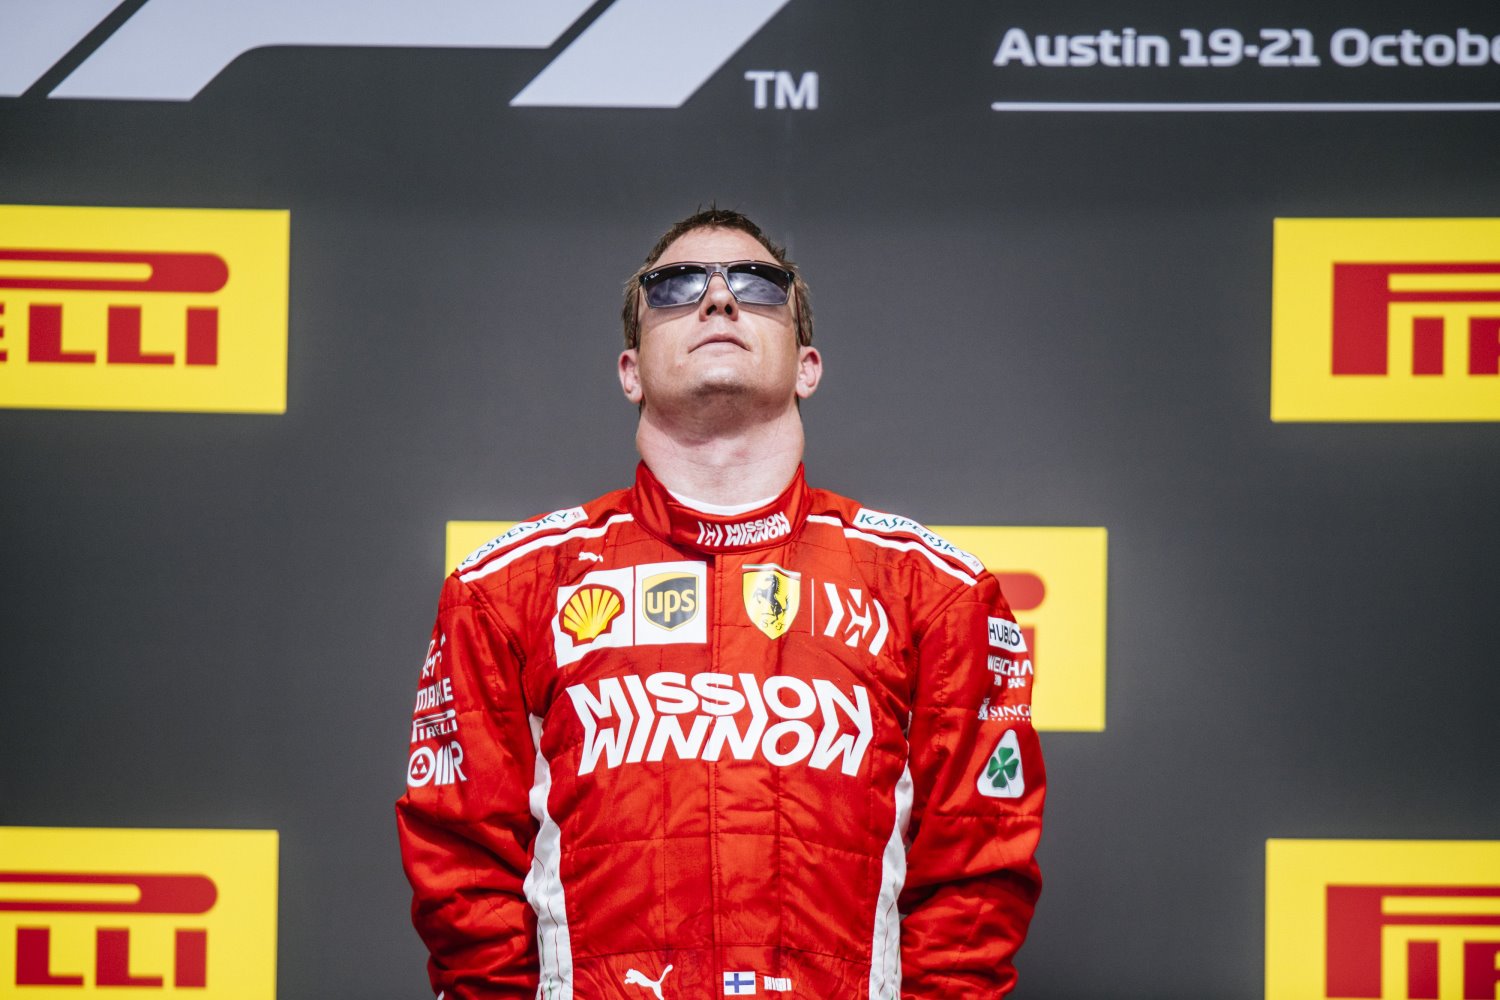 Raikkonen basks in the sunlight, enjoying a win to prove to Ferrari management they made a mistake replacing him